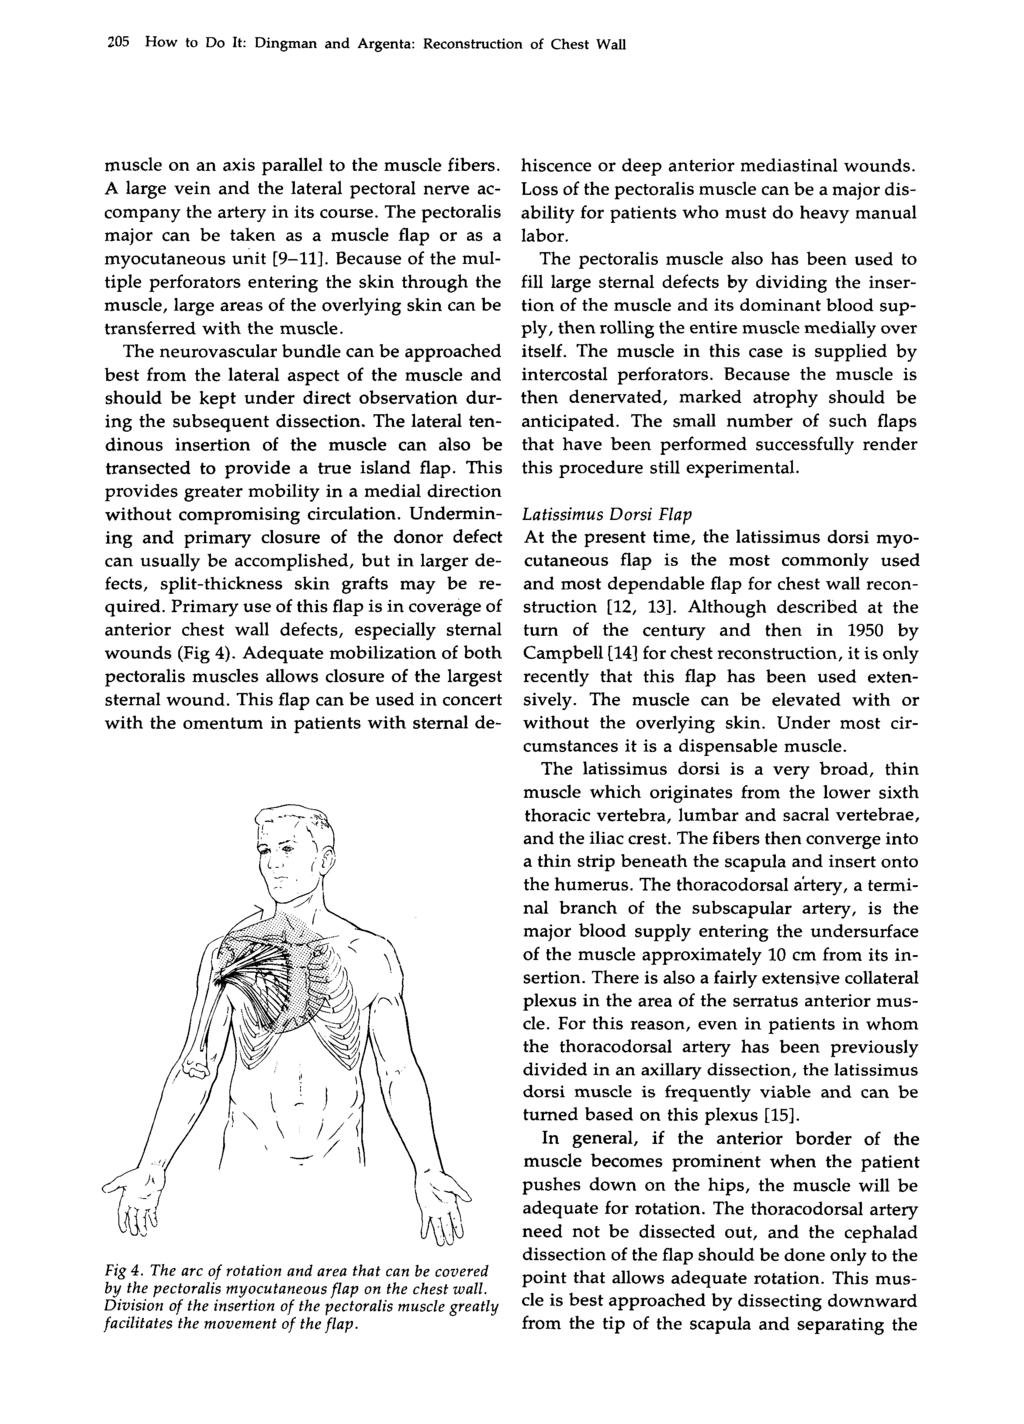 205 How to Do It: Dingman and Argenta: Reconstruction of Chest Wall muscle on an axis parallel to the muscle fibers. A large vein and the lateral pectoral nerve accompany the artery in its course.